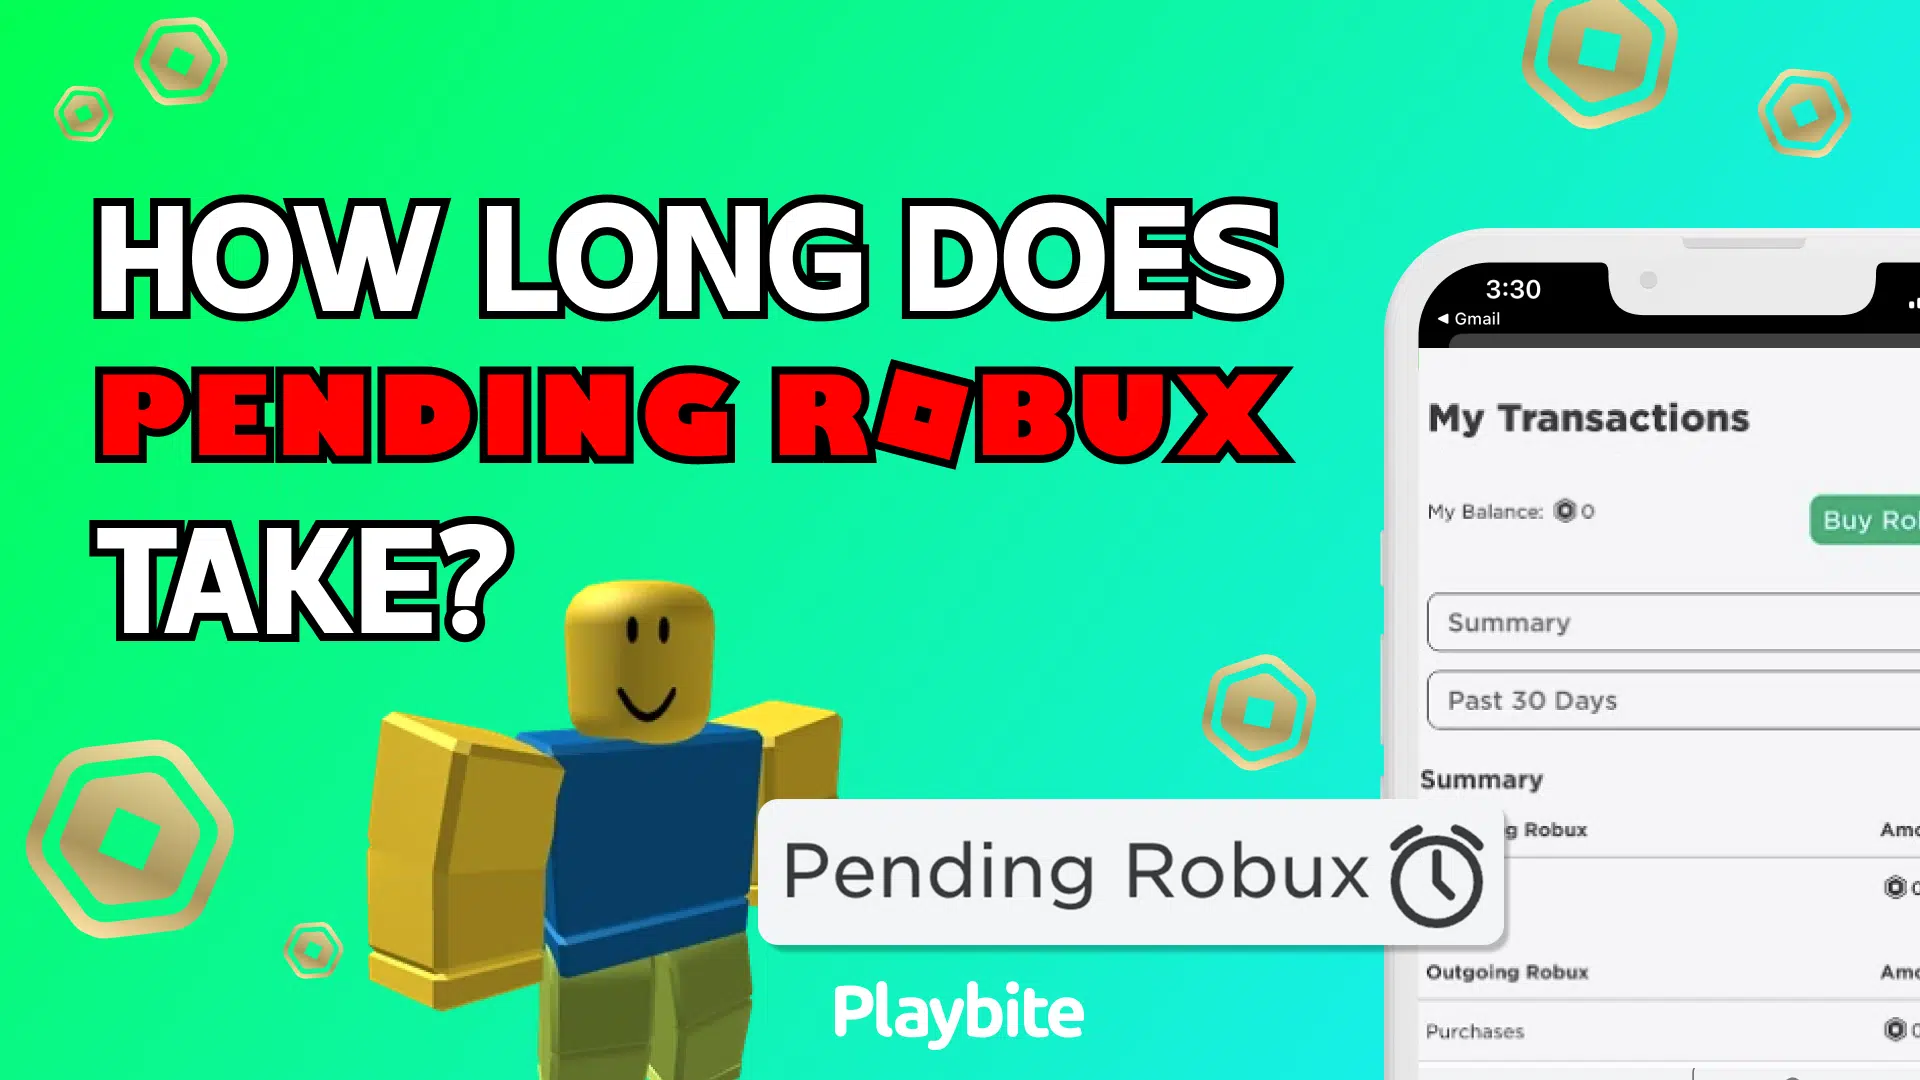 How To Get 20 Robux For Free - Playbite